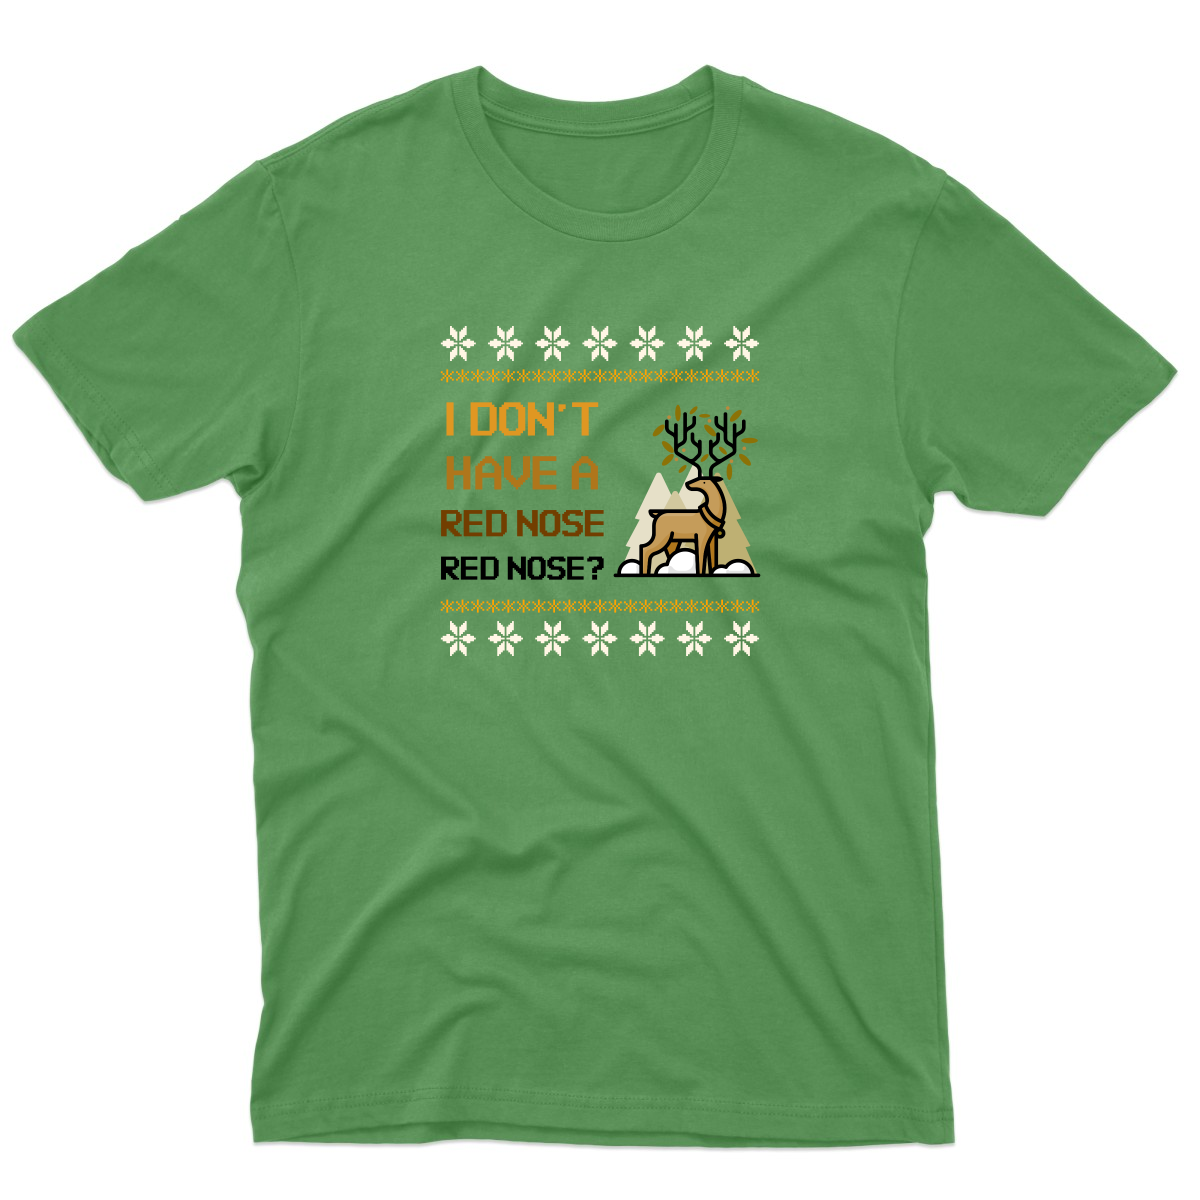 2021 Ugly Sweater Christmas Party Men's T-shirt | Green